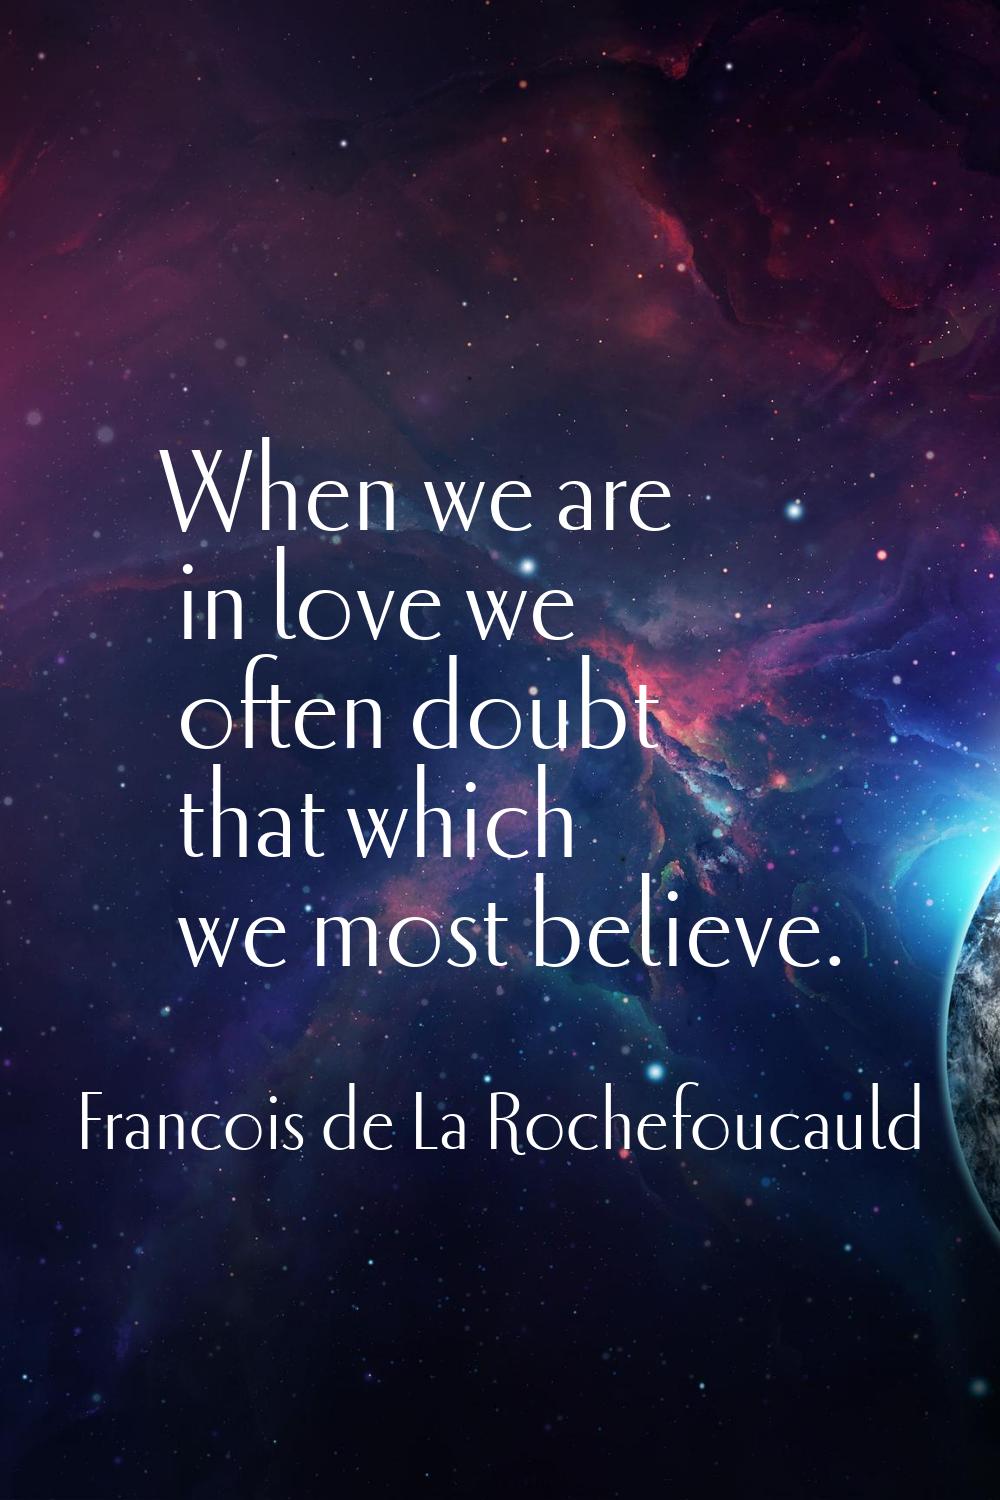 When we are in love we often doubt that which we most believe.